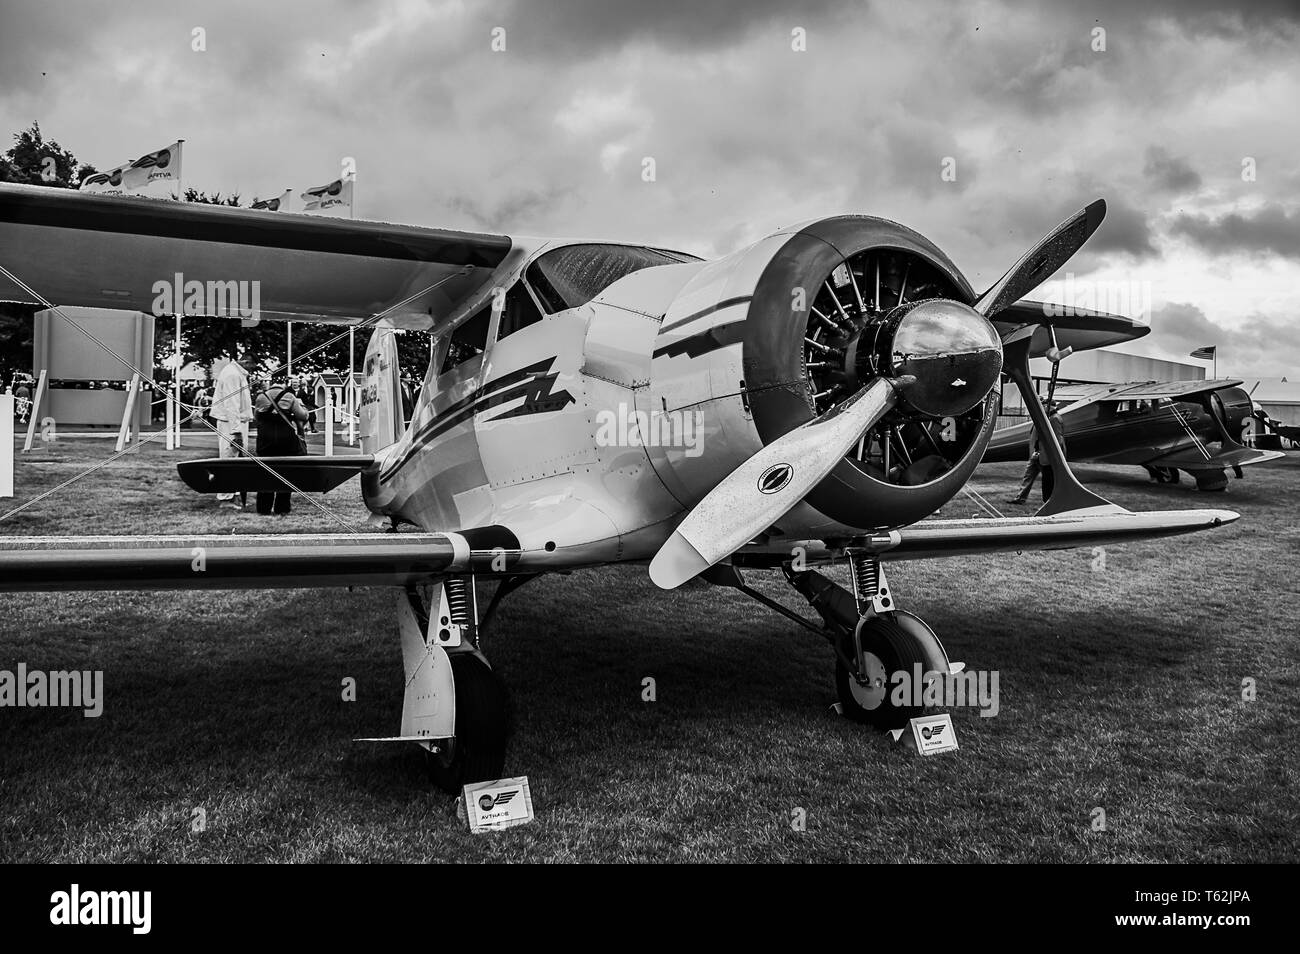 A 1937 Beech D17-S Staggerwing on static display at Goodwood Revival 2017 Stock Photo